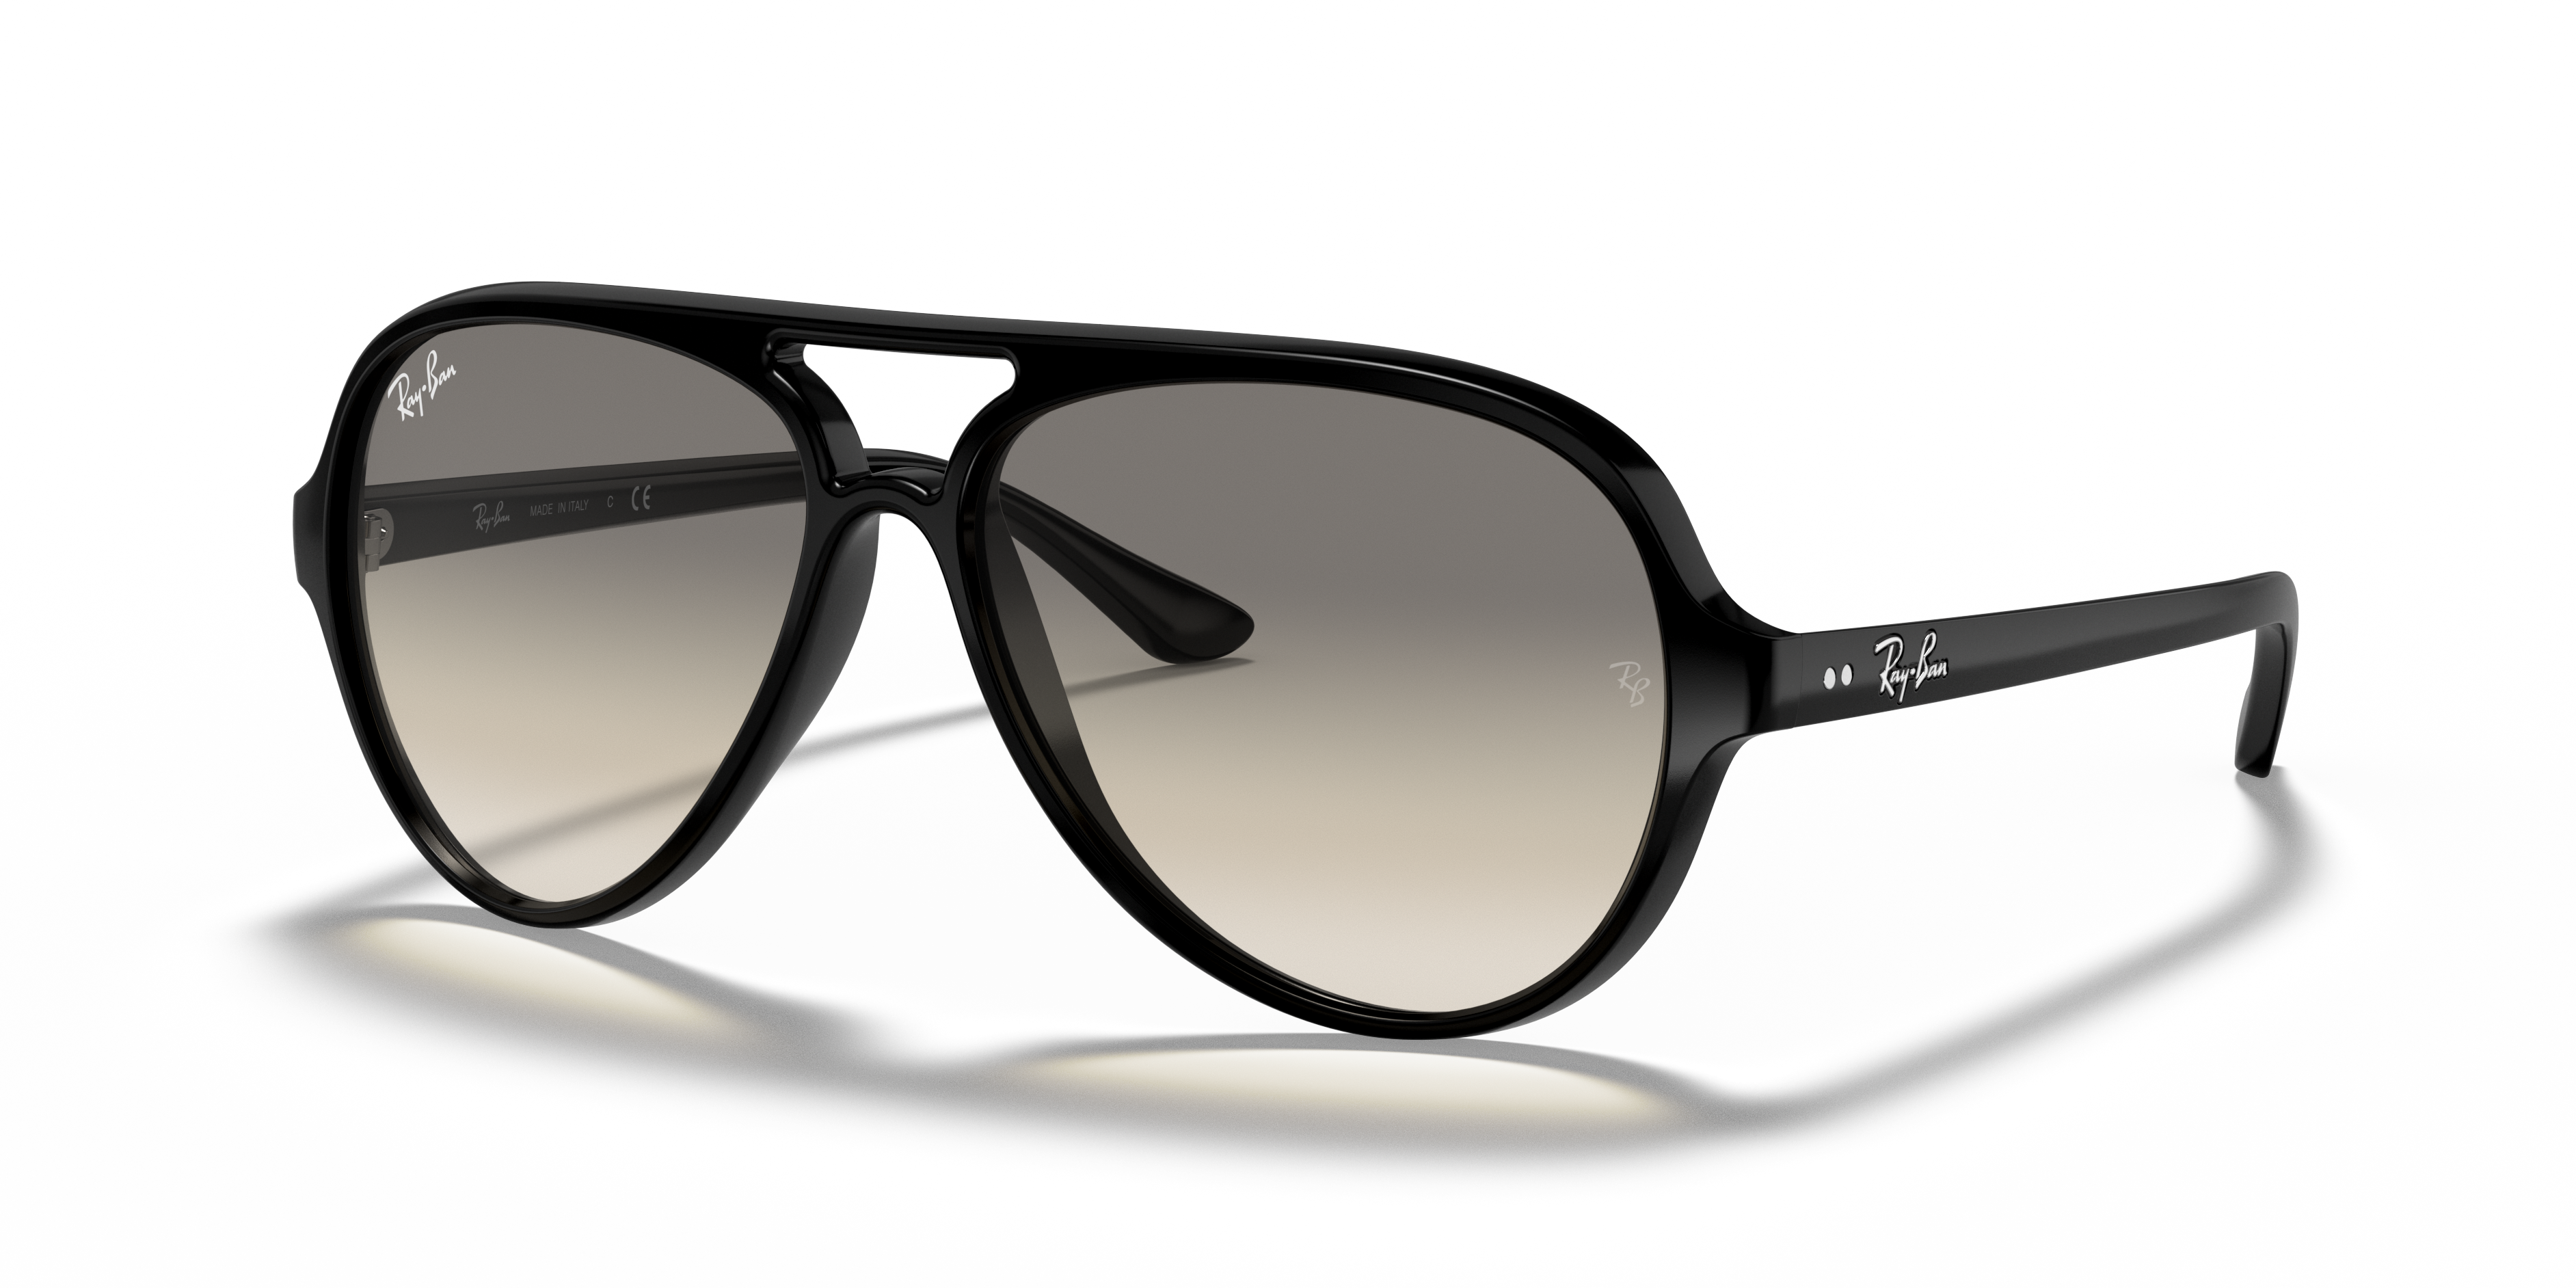 CATS 5000 CLASSIC Sunglasses in Black and Blue - RB4125 | Ray-Ban® US